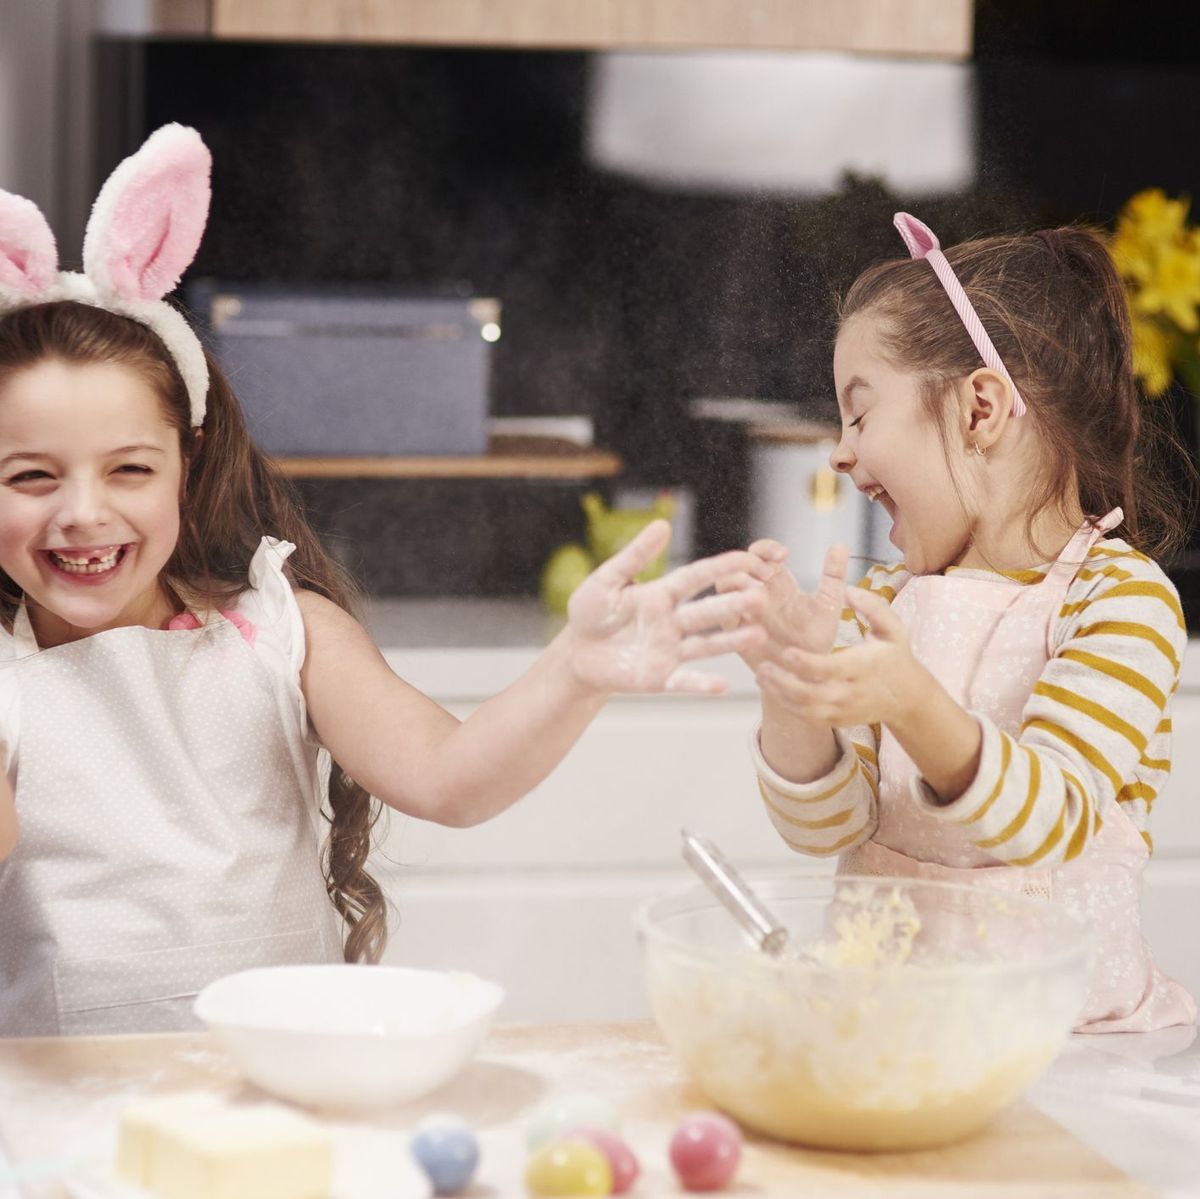 100 Happy Easter Wishes - Easter Messages for Friends and Family